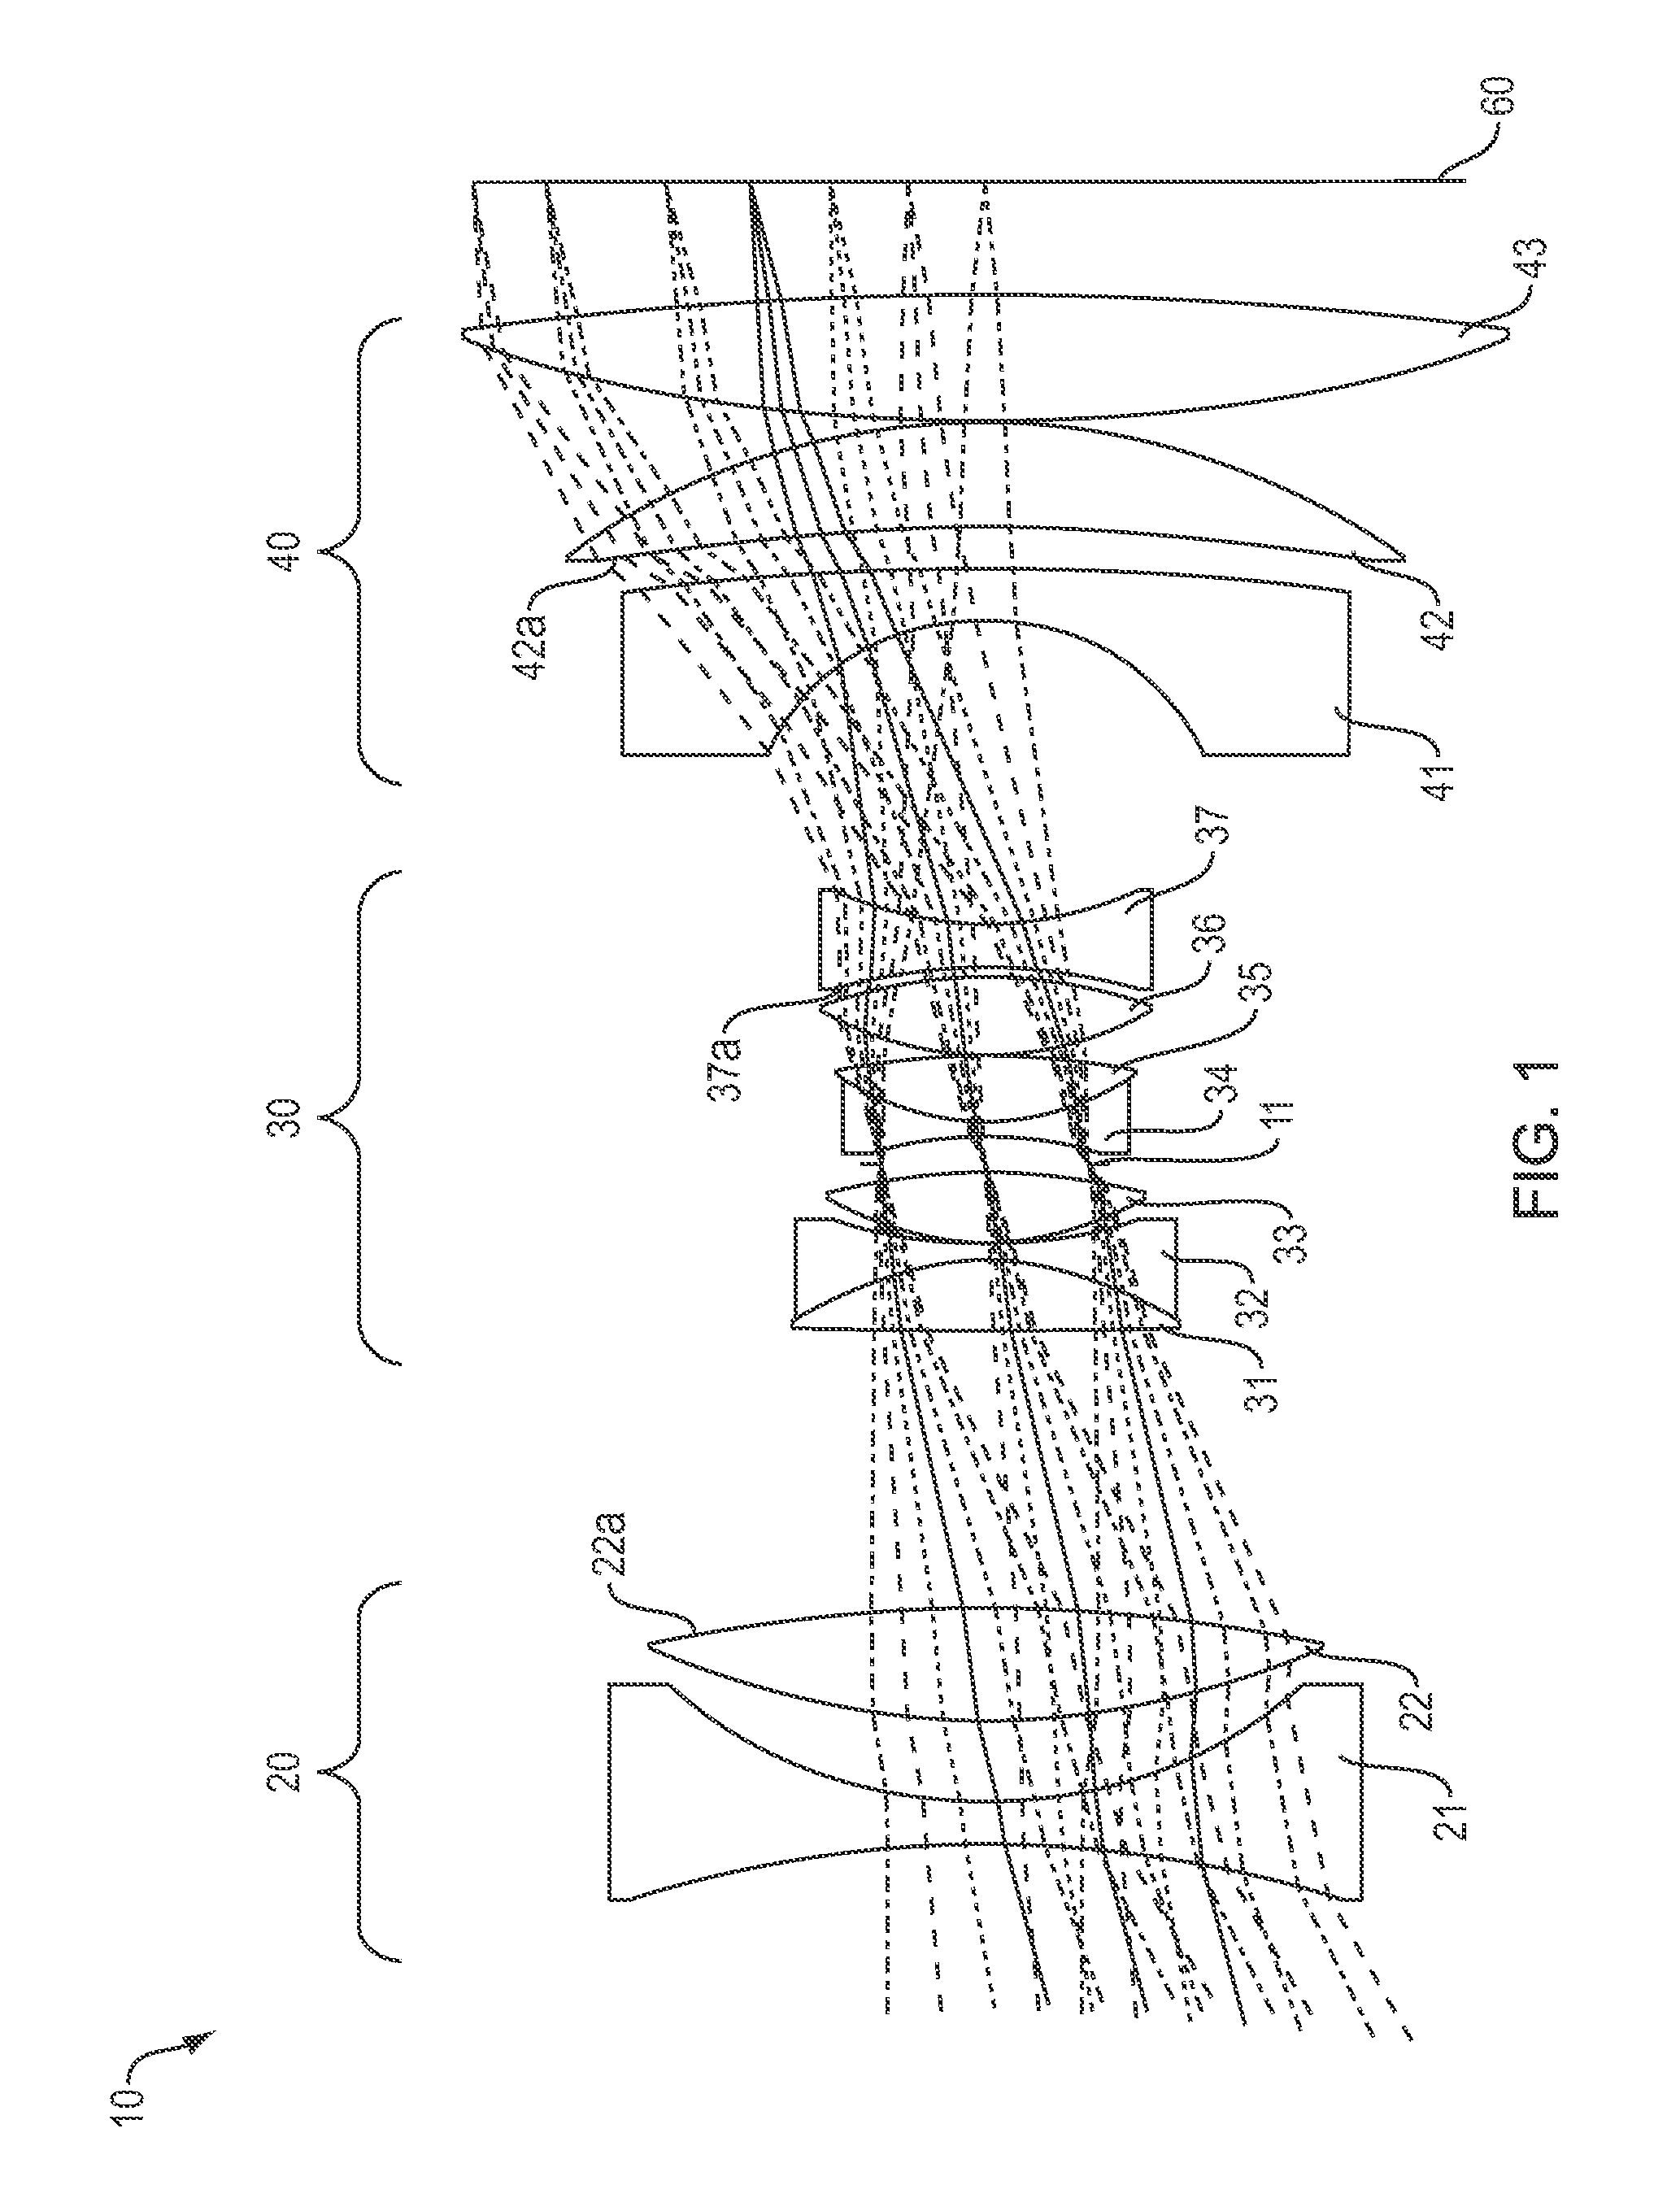 Low distortion athermalized imaging lens